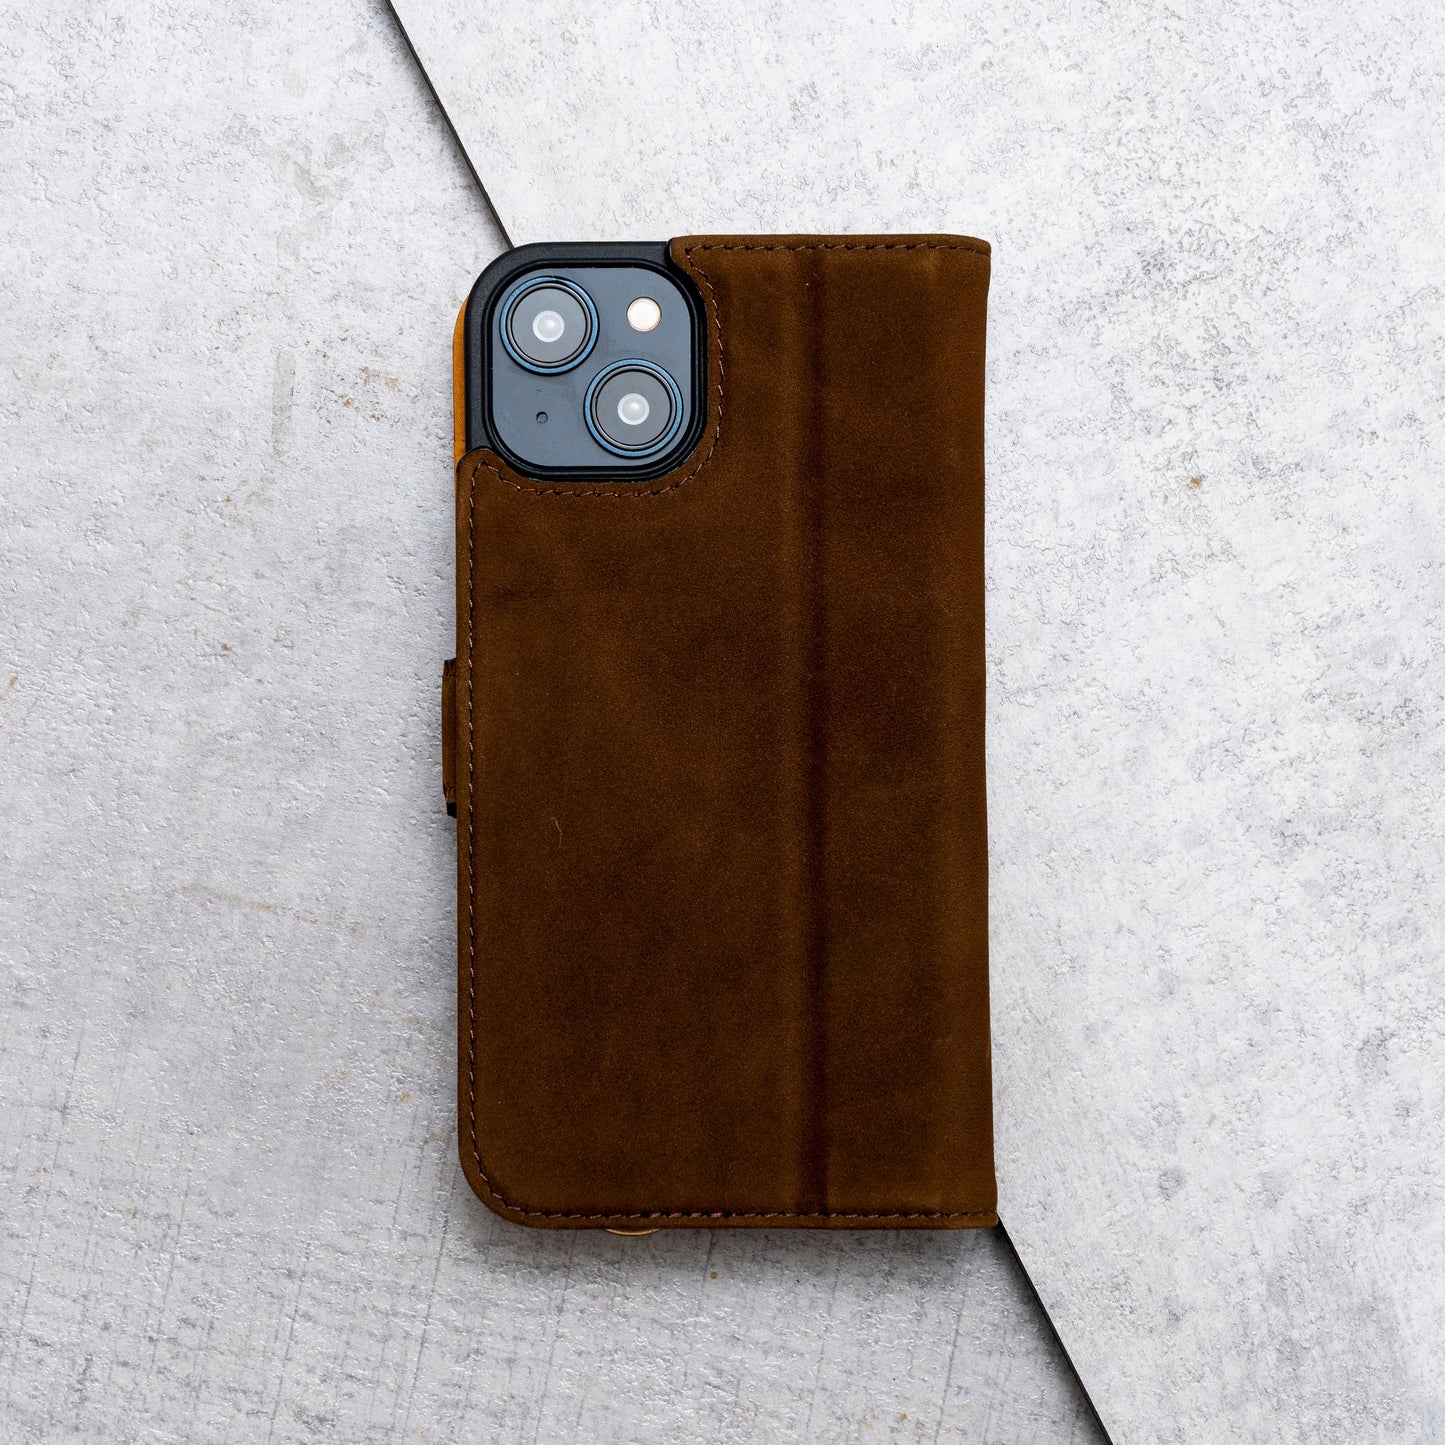 iPhone 11 Leather Case. Premium Nubuck Genuine Leather Stand Case/Cover/Wallet (Chocolate Brown)